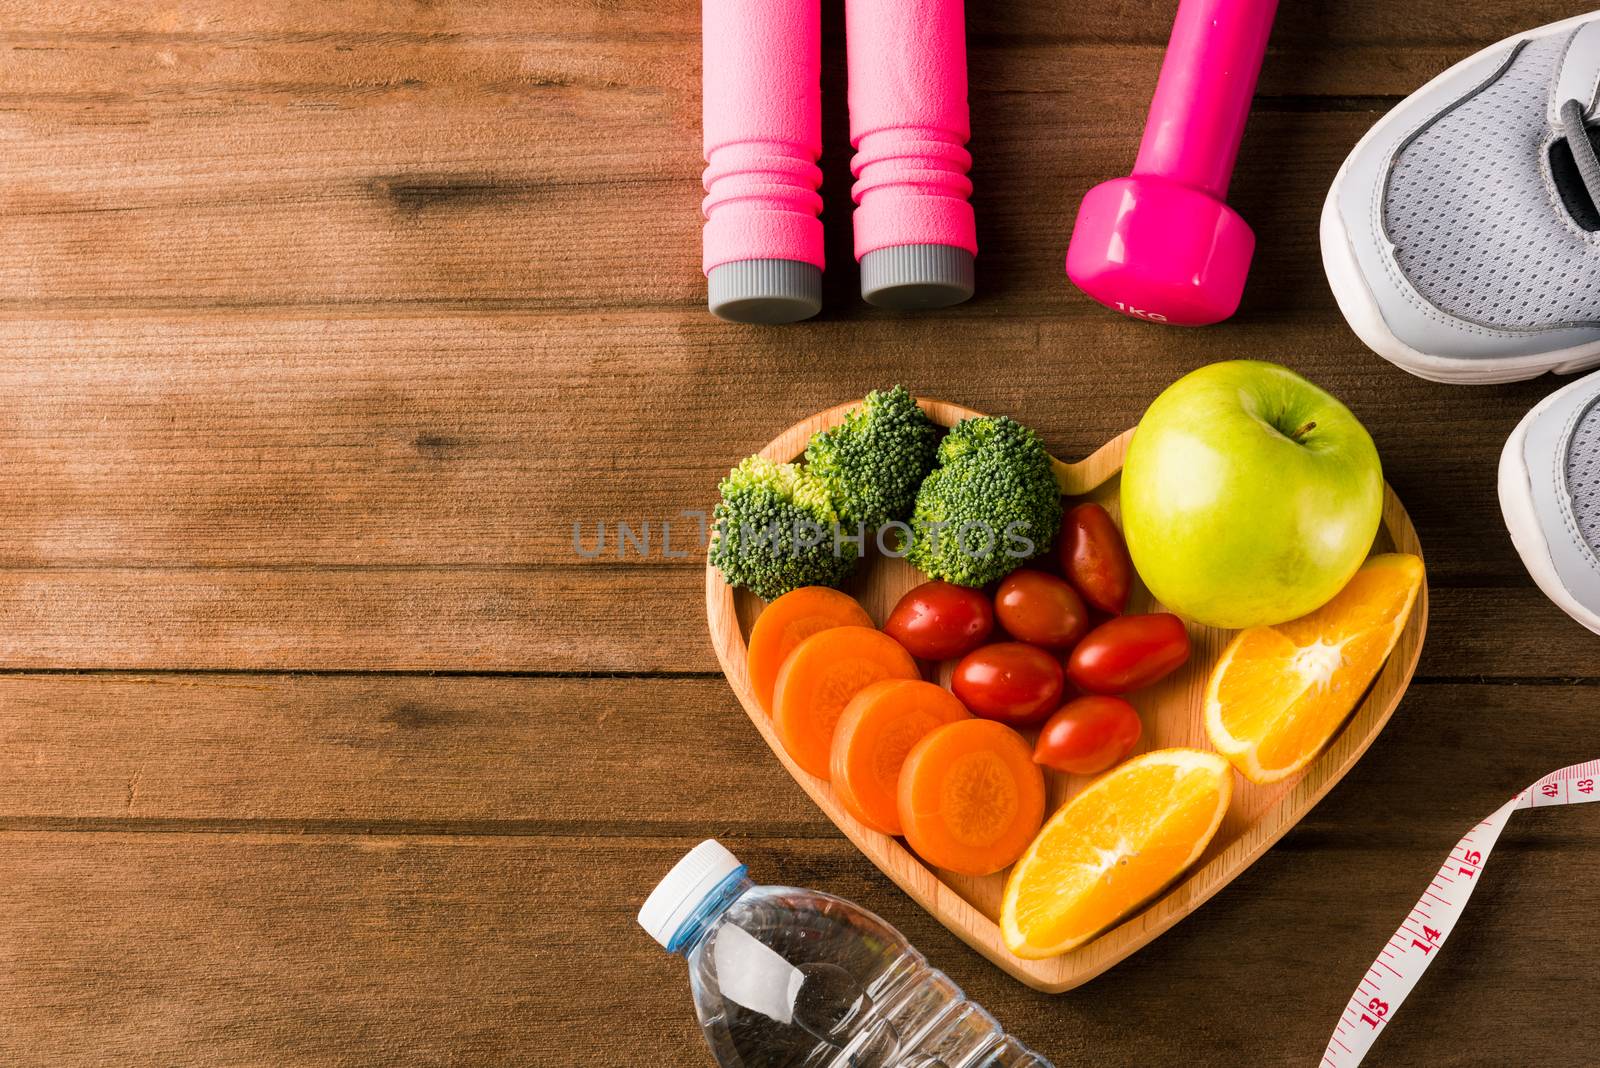 Top view of fresh fruits and vegetables in heart plate wood (apple, carrot, tomato, orange, broccoli) and dumbbells, sport shoes sports equipment on wooden table, Healthy lifestyle diet food concept